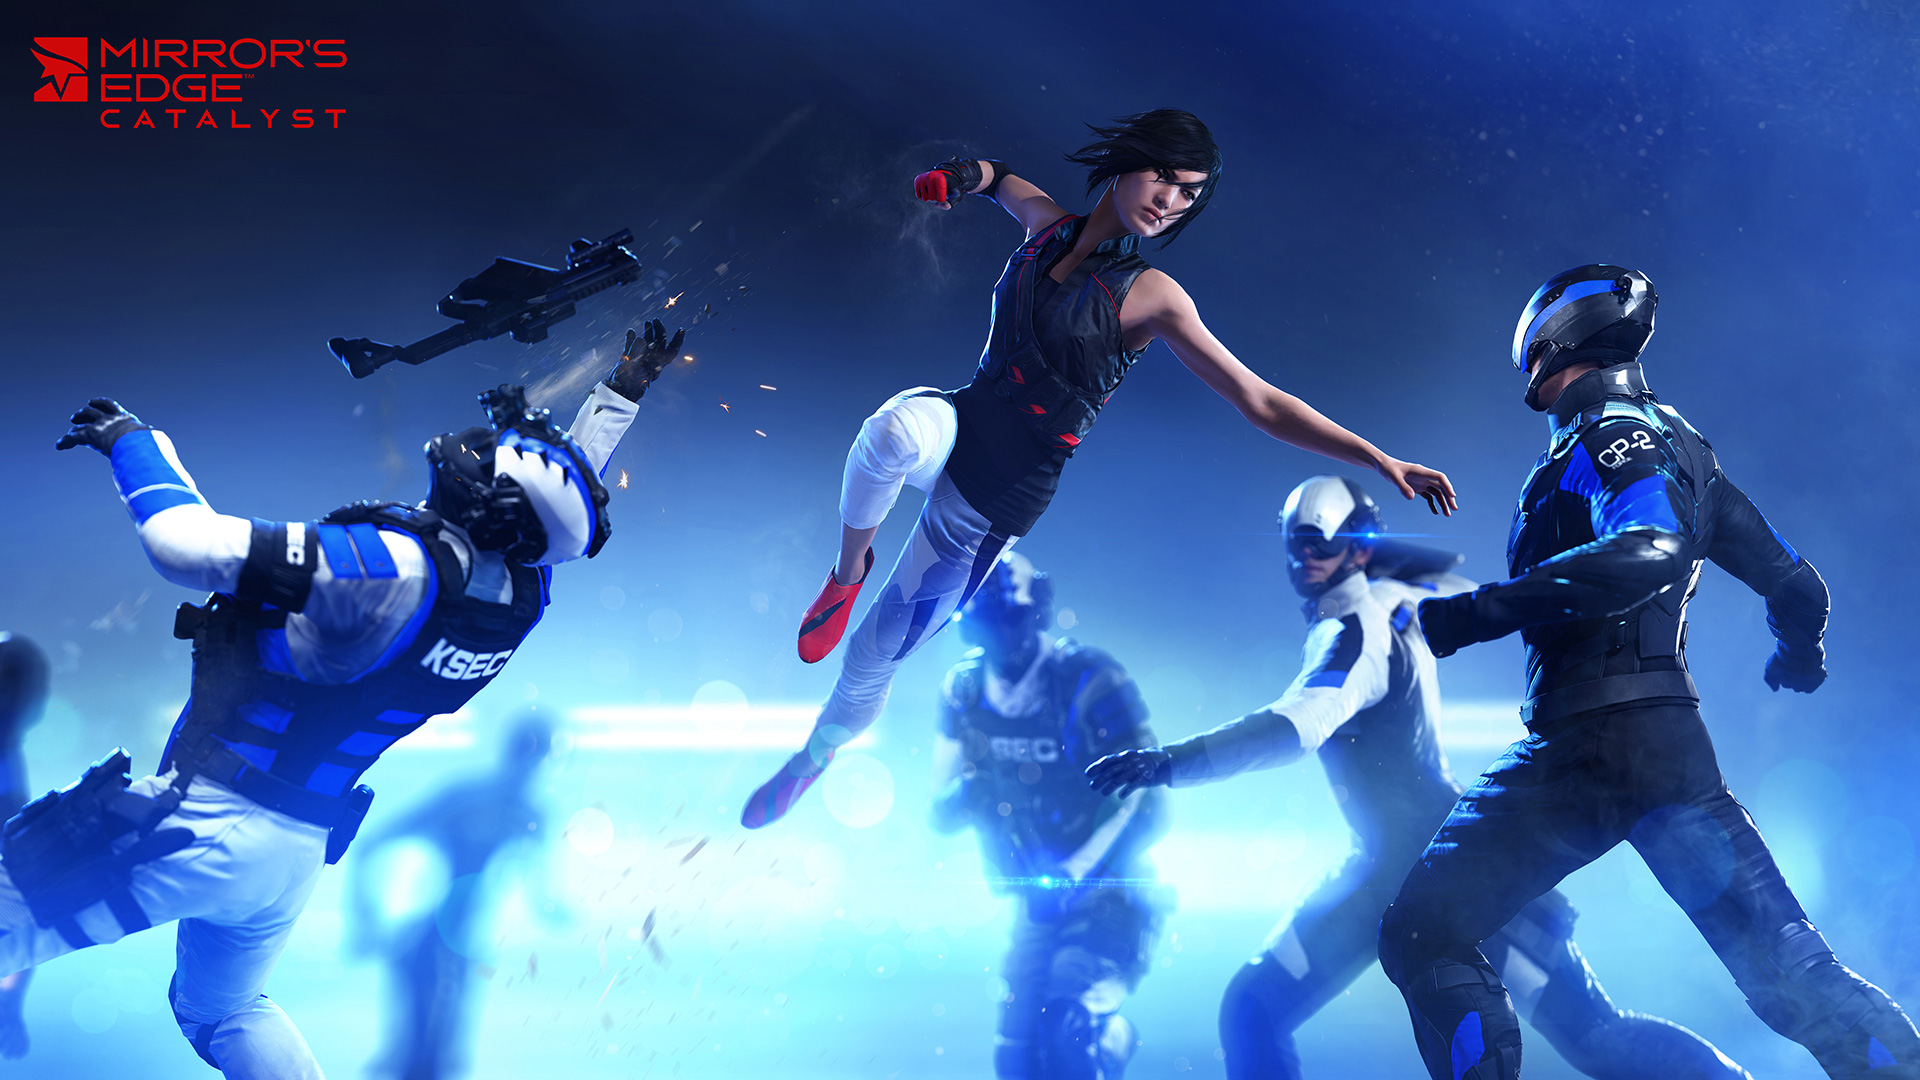 EA has announced plans to delist Mirror's Edge and several